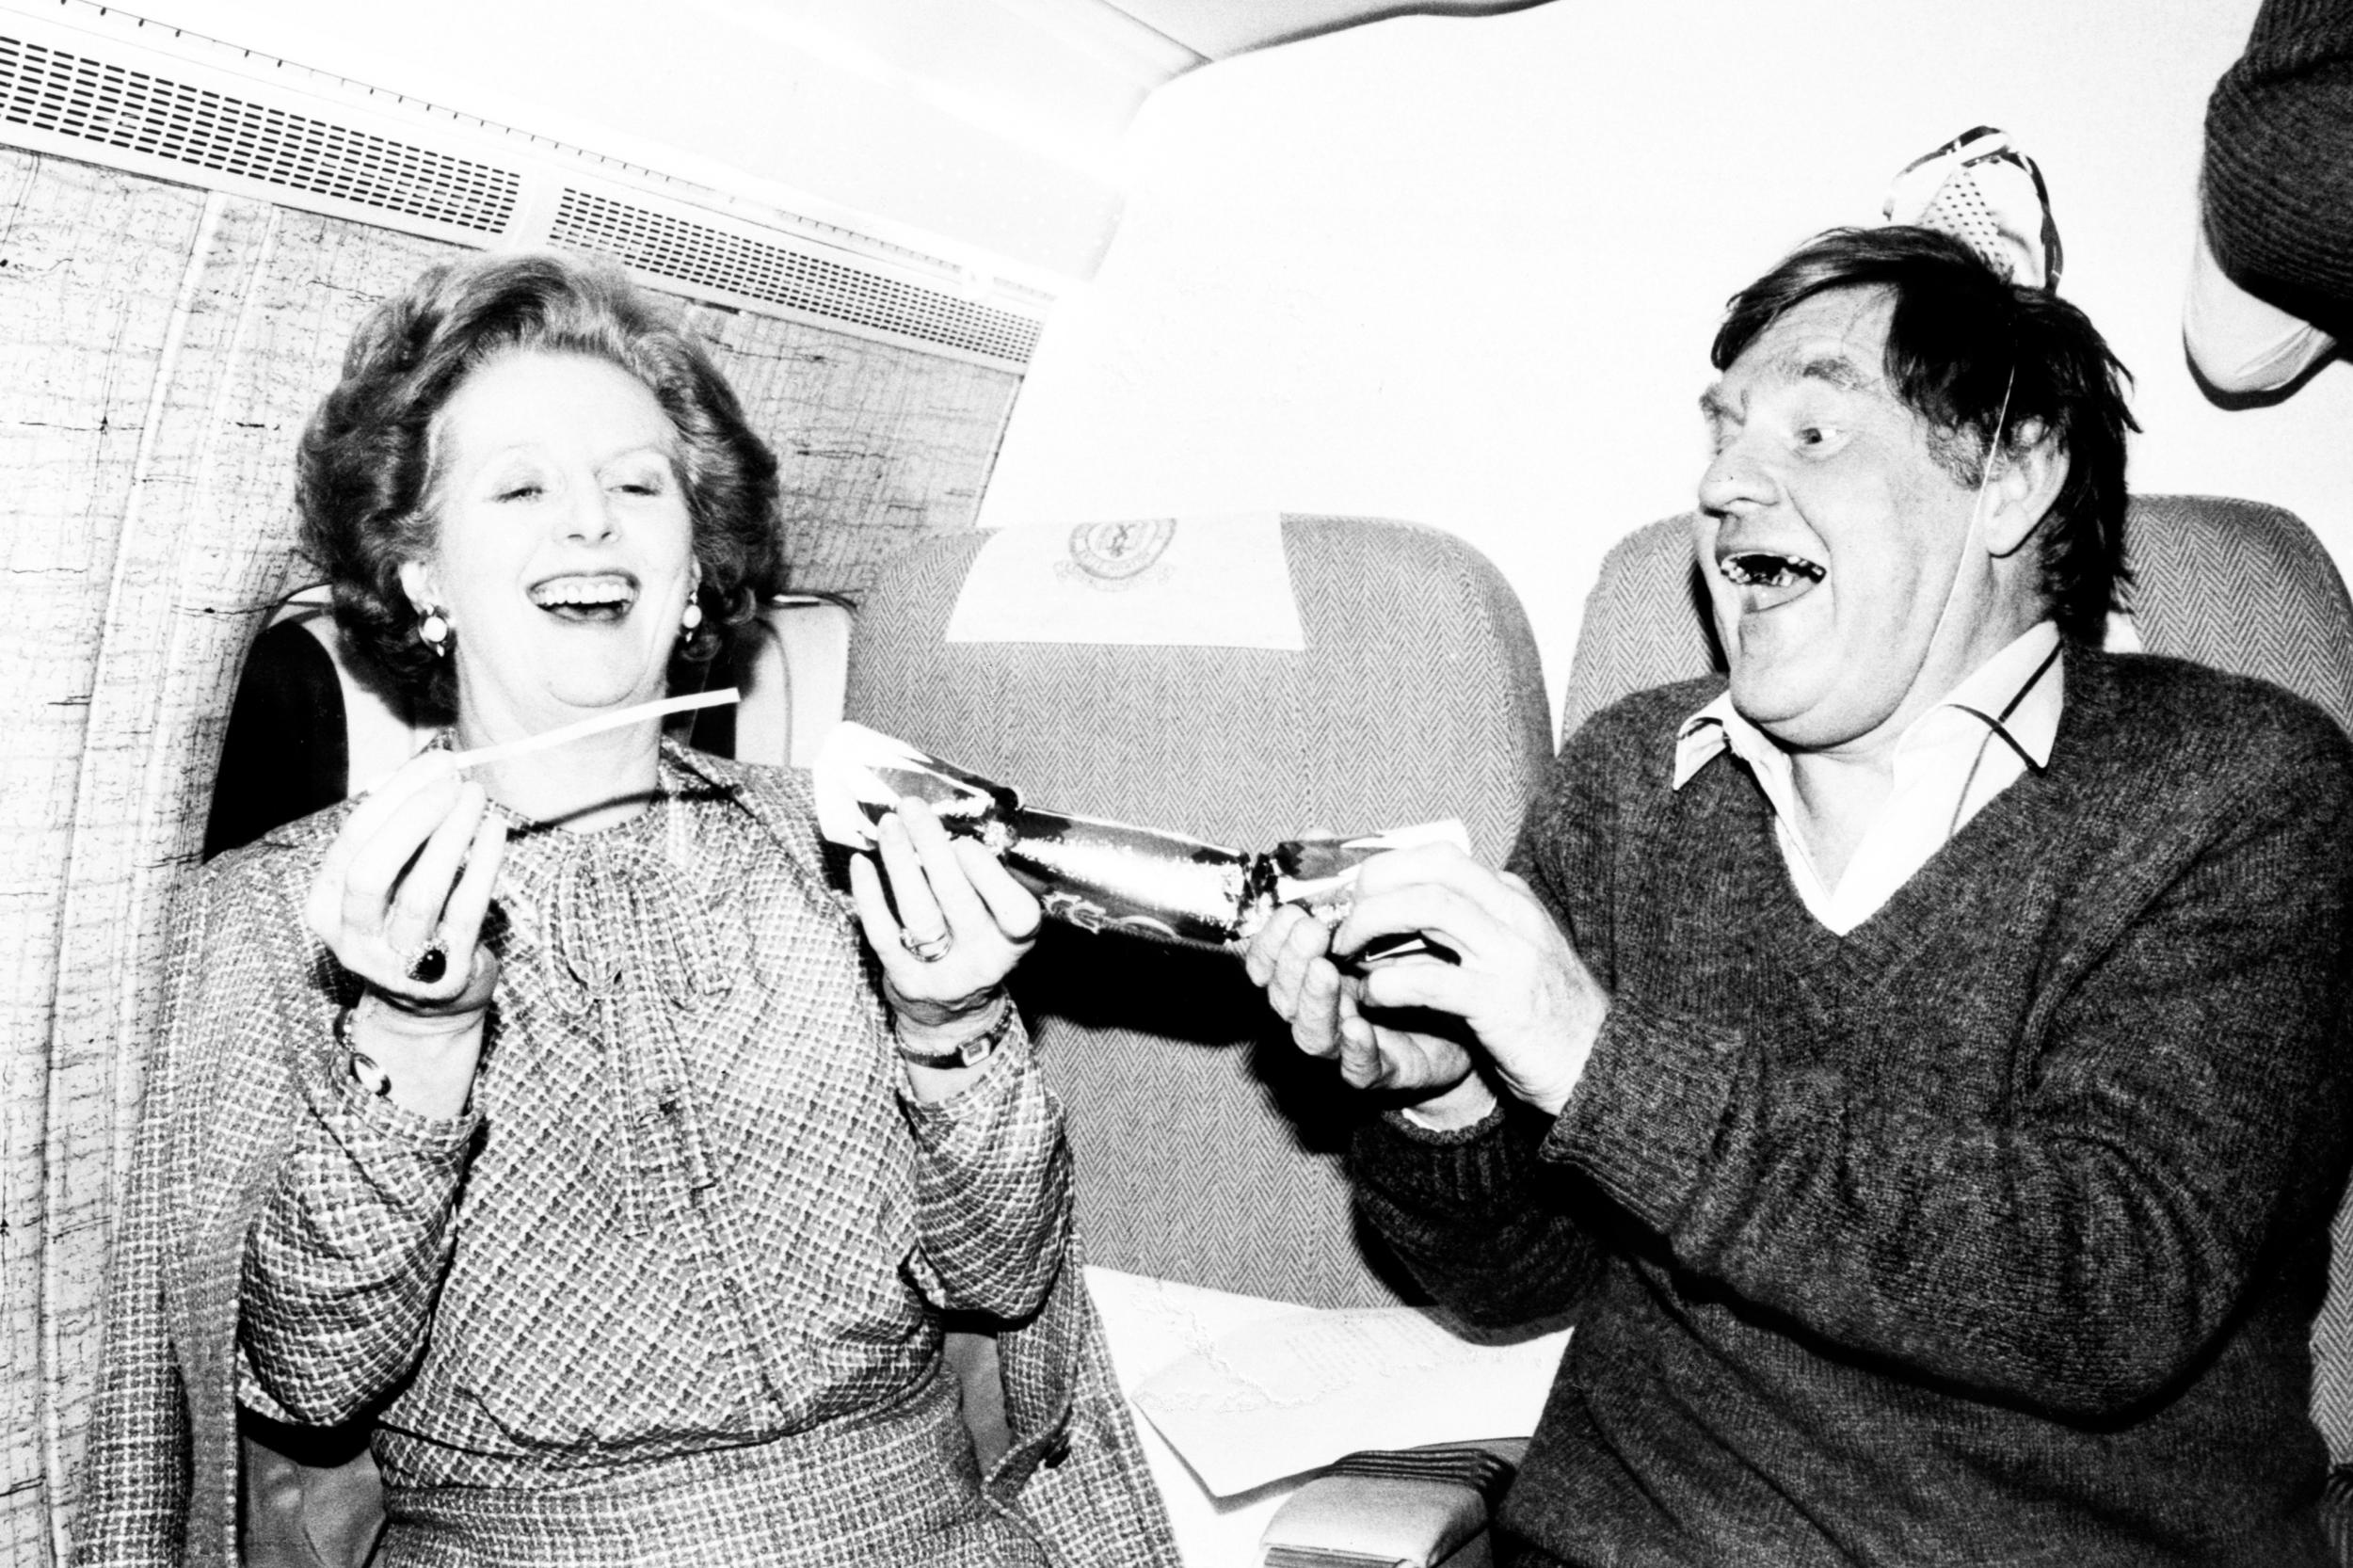 Prime minister Margaret Thatcher pulls a Christmas cracker with her chief press officer Bernard Ingham during a flight from Washington to London in 1984